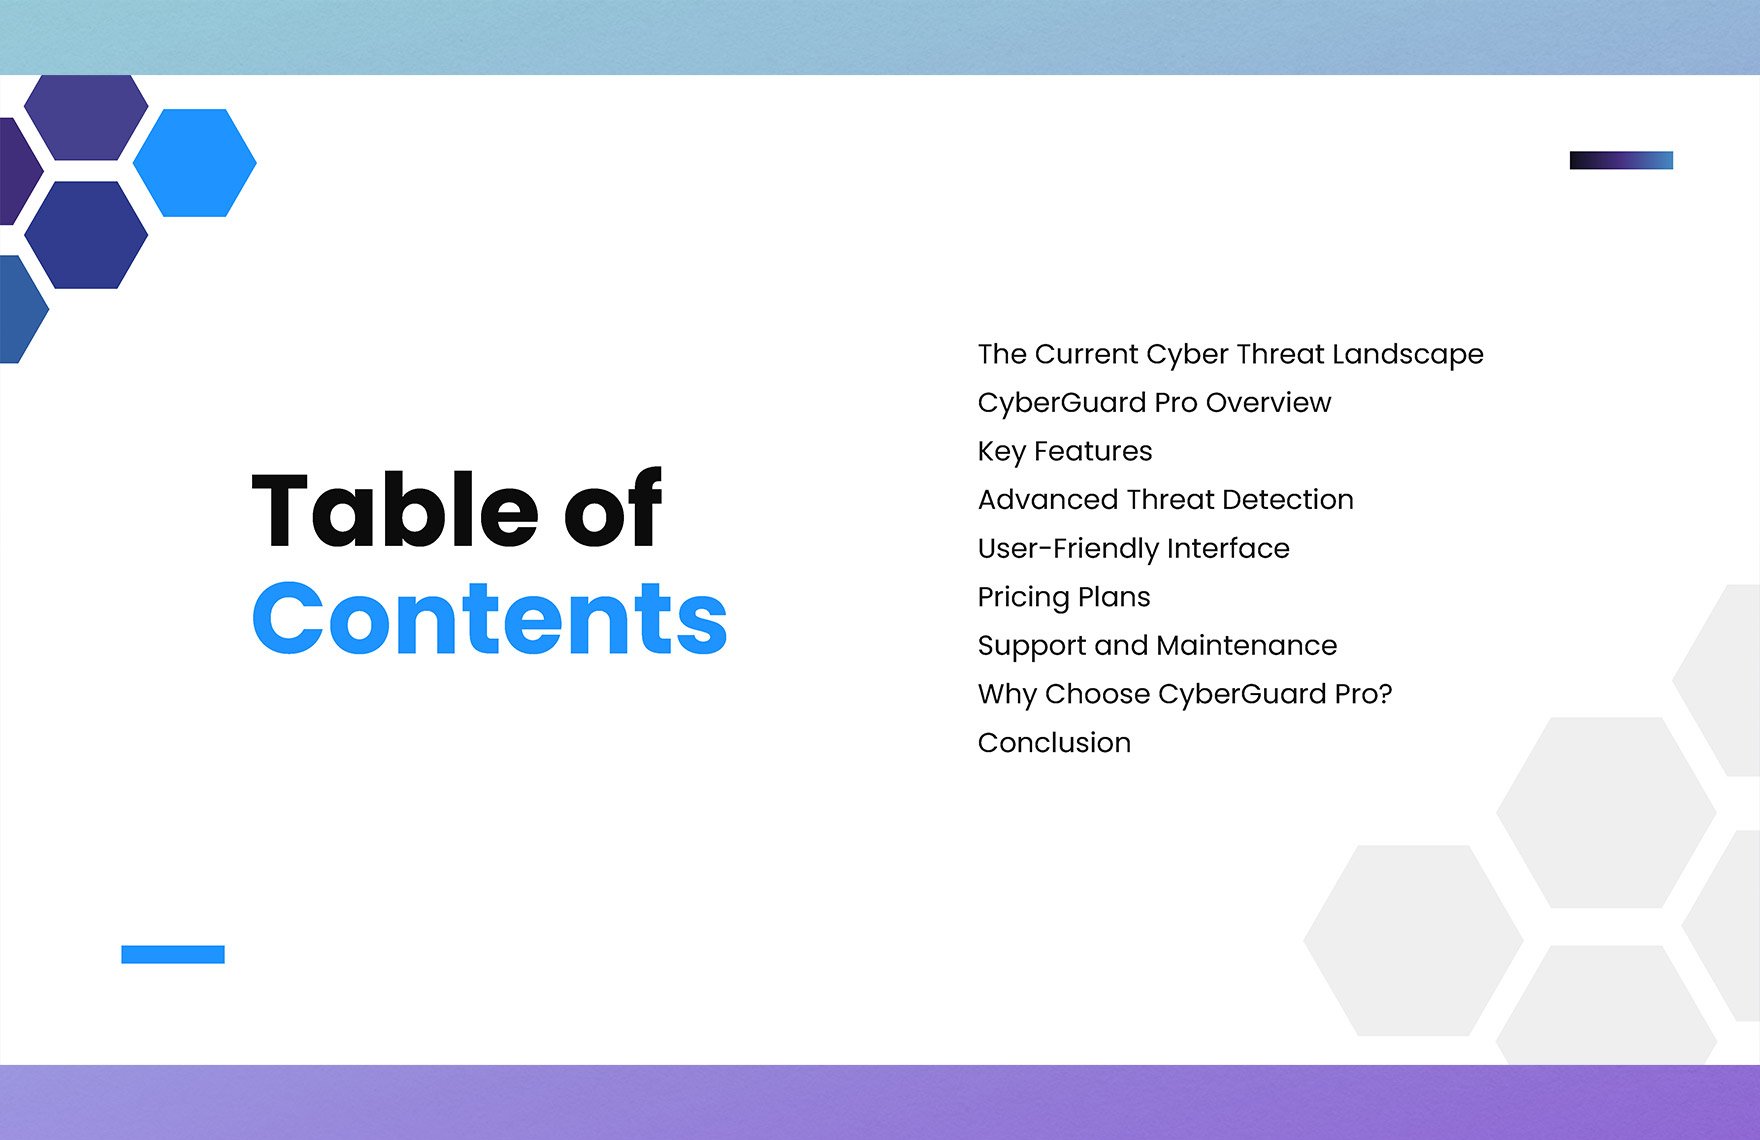 Cyber Security Sales Pitch Template